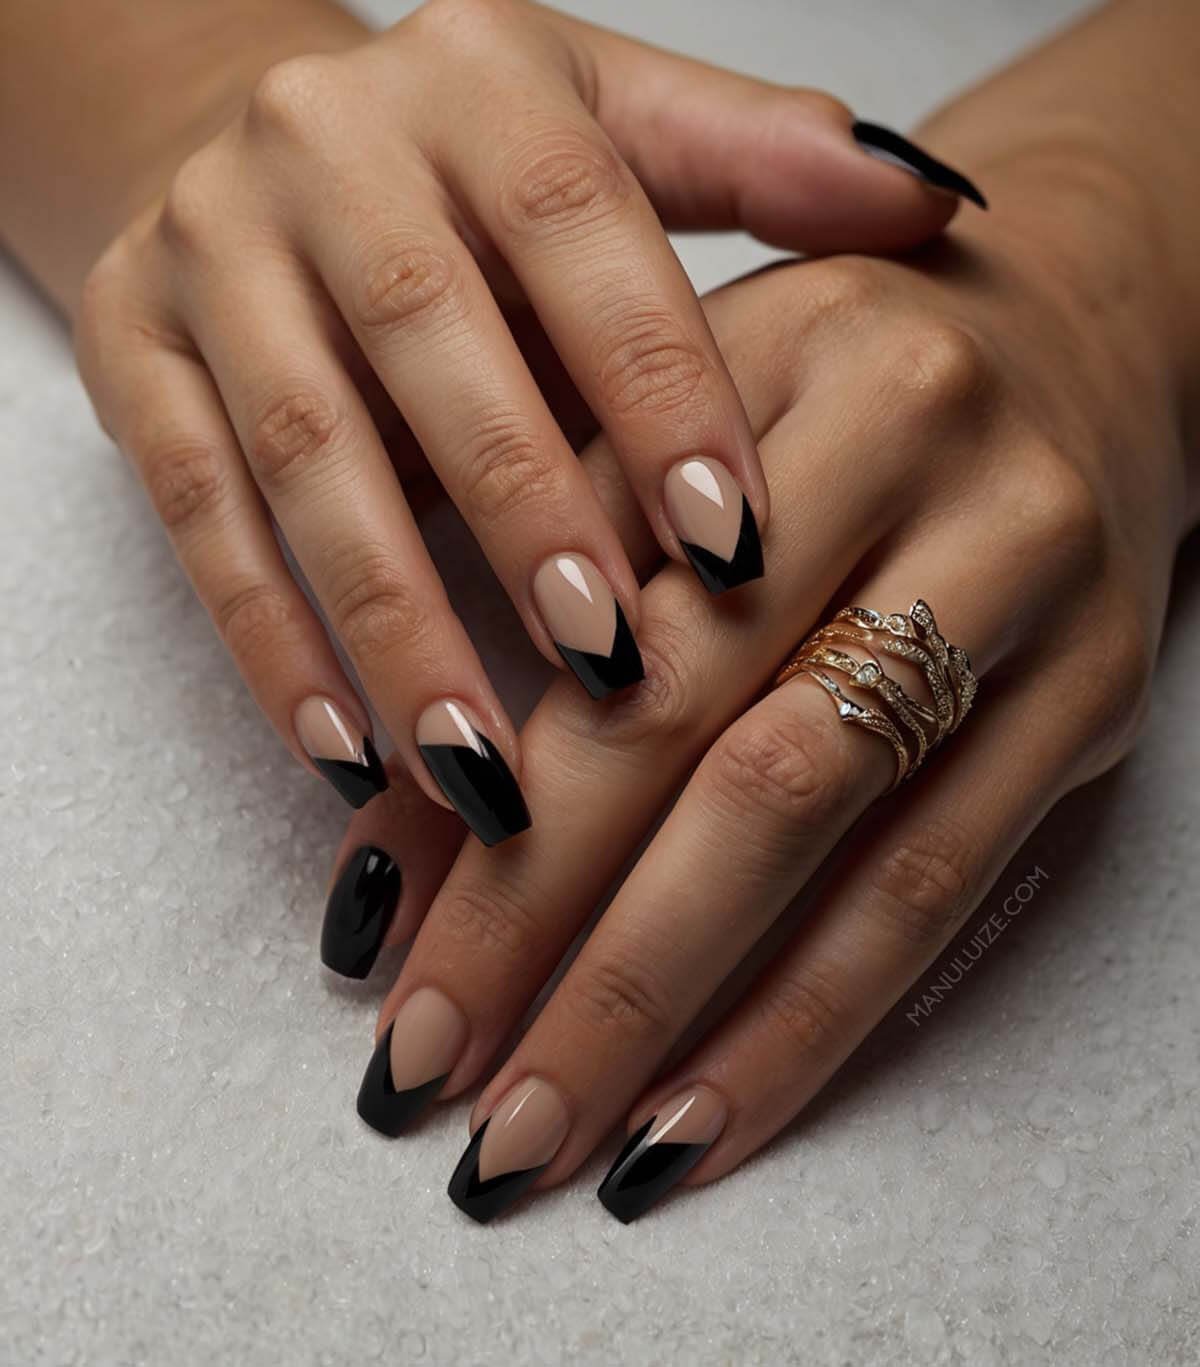 French nude and black manicure